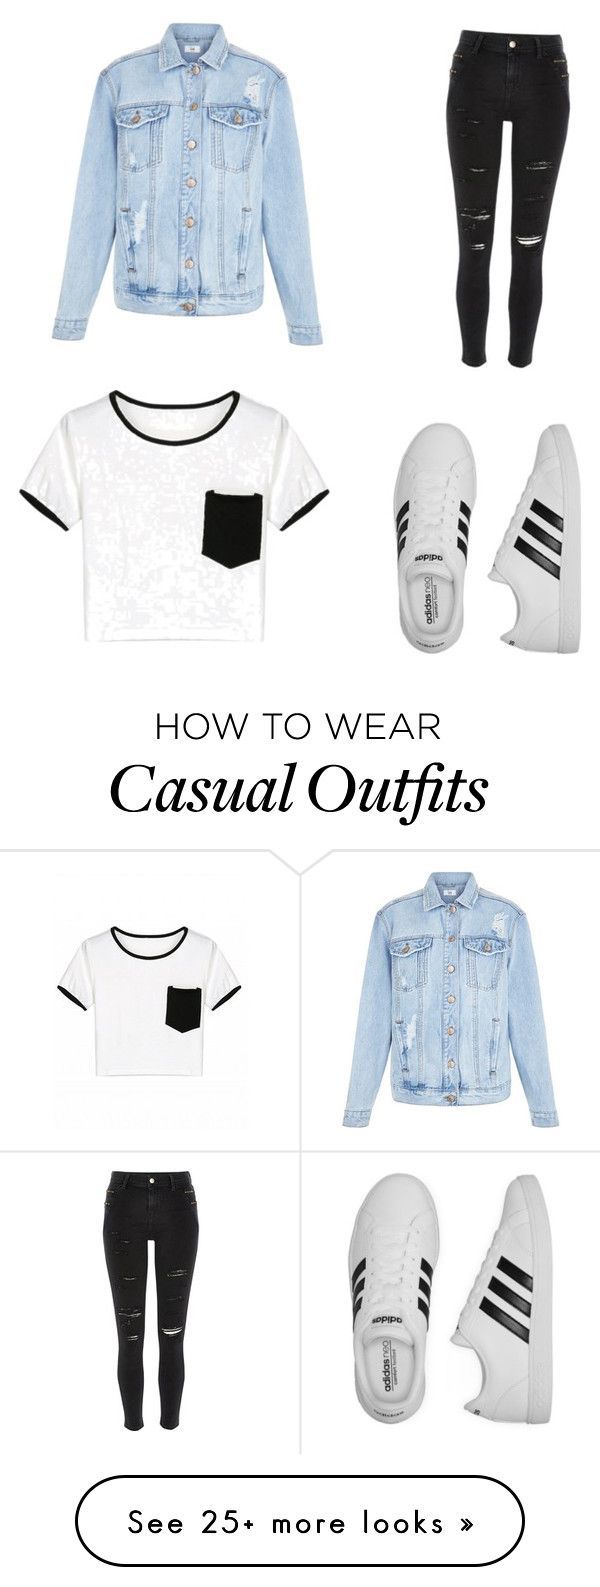 “Casual” by ellakcrawley on Polyvore featuring New Look, River Island and adidas